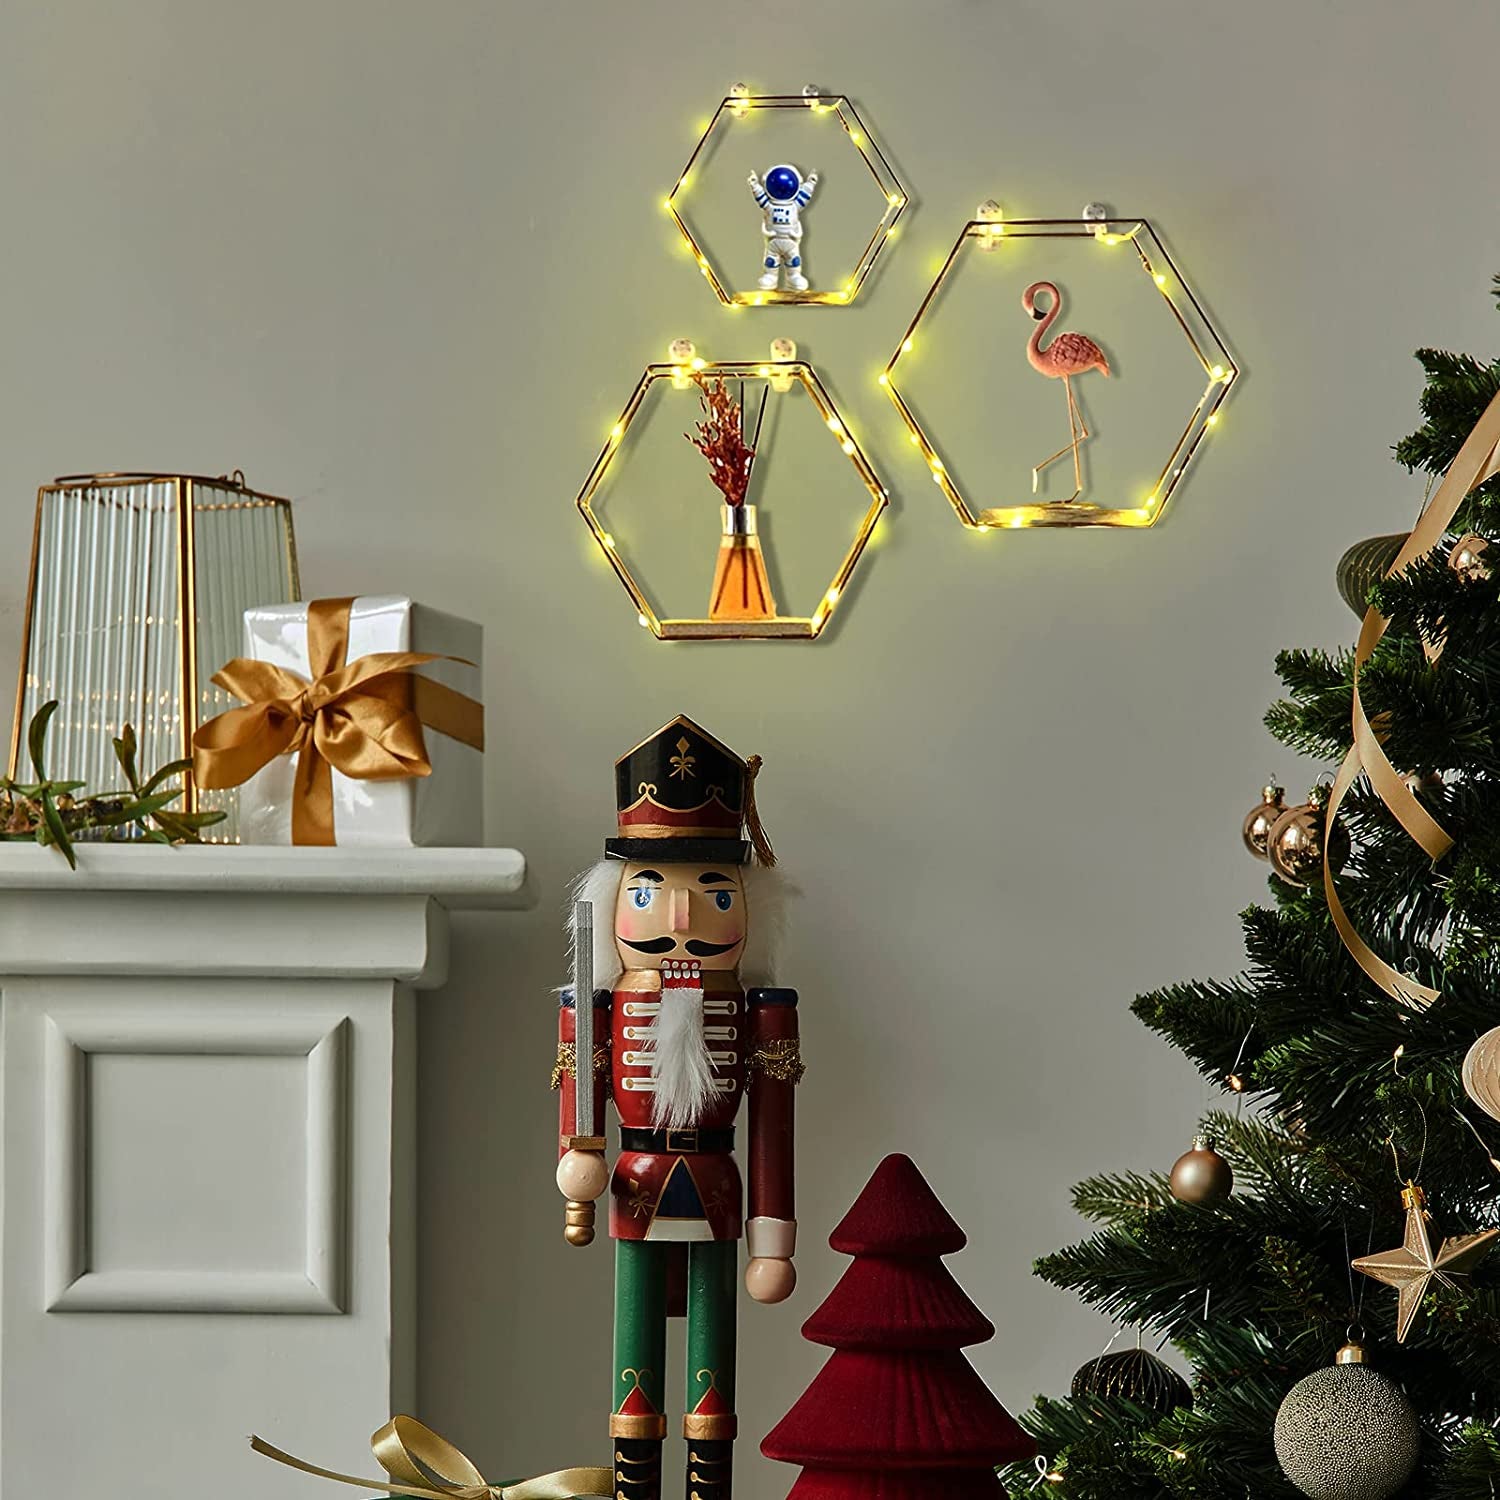  Hexagon Floating Shelves Wall Decor, Gold Metal Wire and Wood Set of 3 with LED Lights